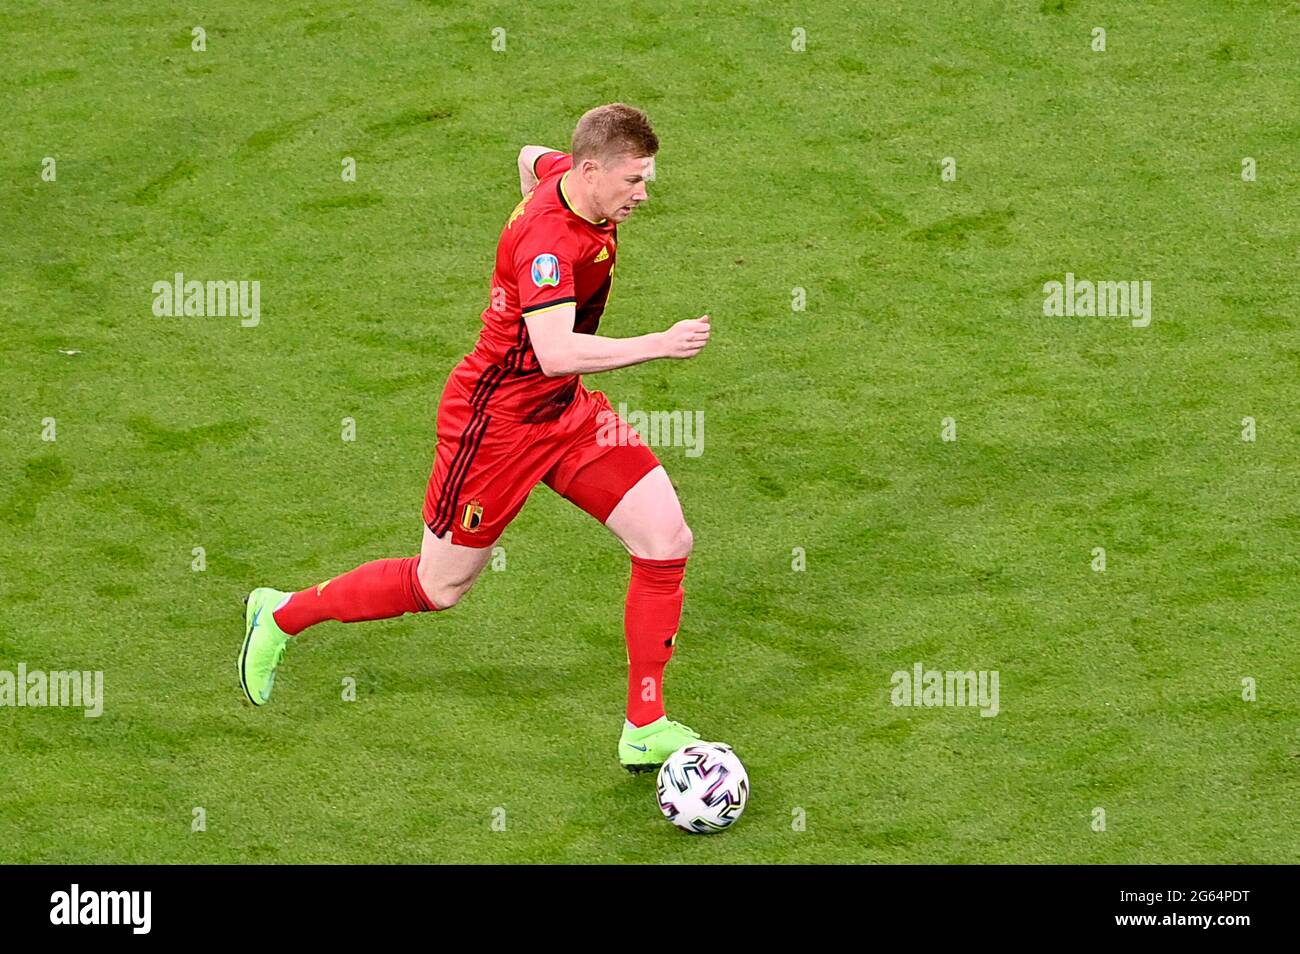 Munchen, Germany. 02nd July, 2021. Belgian midfielder Kevin De Bruyne (7) pictured during a soccer game during the quarter final Euro 2020 European Championship between the Belgian national soccer team Red Devils and Italy, called the Azzurri, on friday 2 nd of July 2021 in the Allianz Arena in Munchen, Germany . PHOTO SPORTPIX | SPP | DAVID CATRY Credit: SPP Sport Press Photo. /Alamy Live News Stock Photo